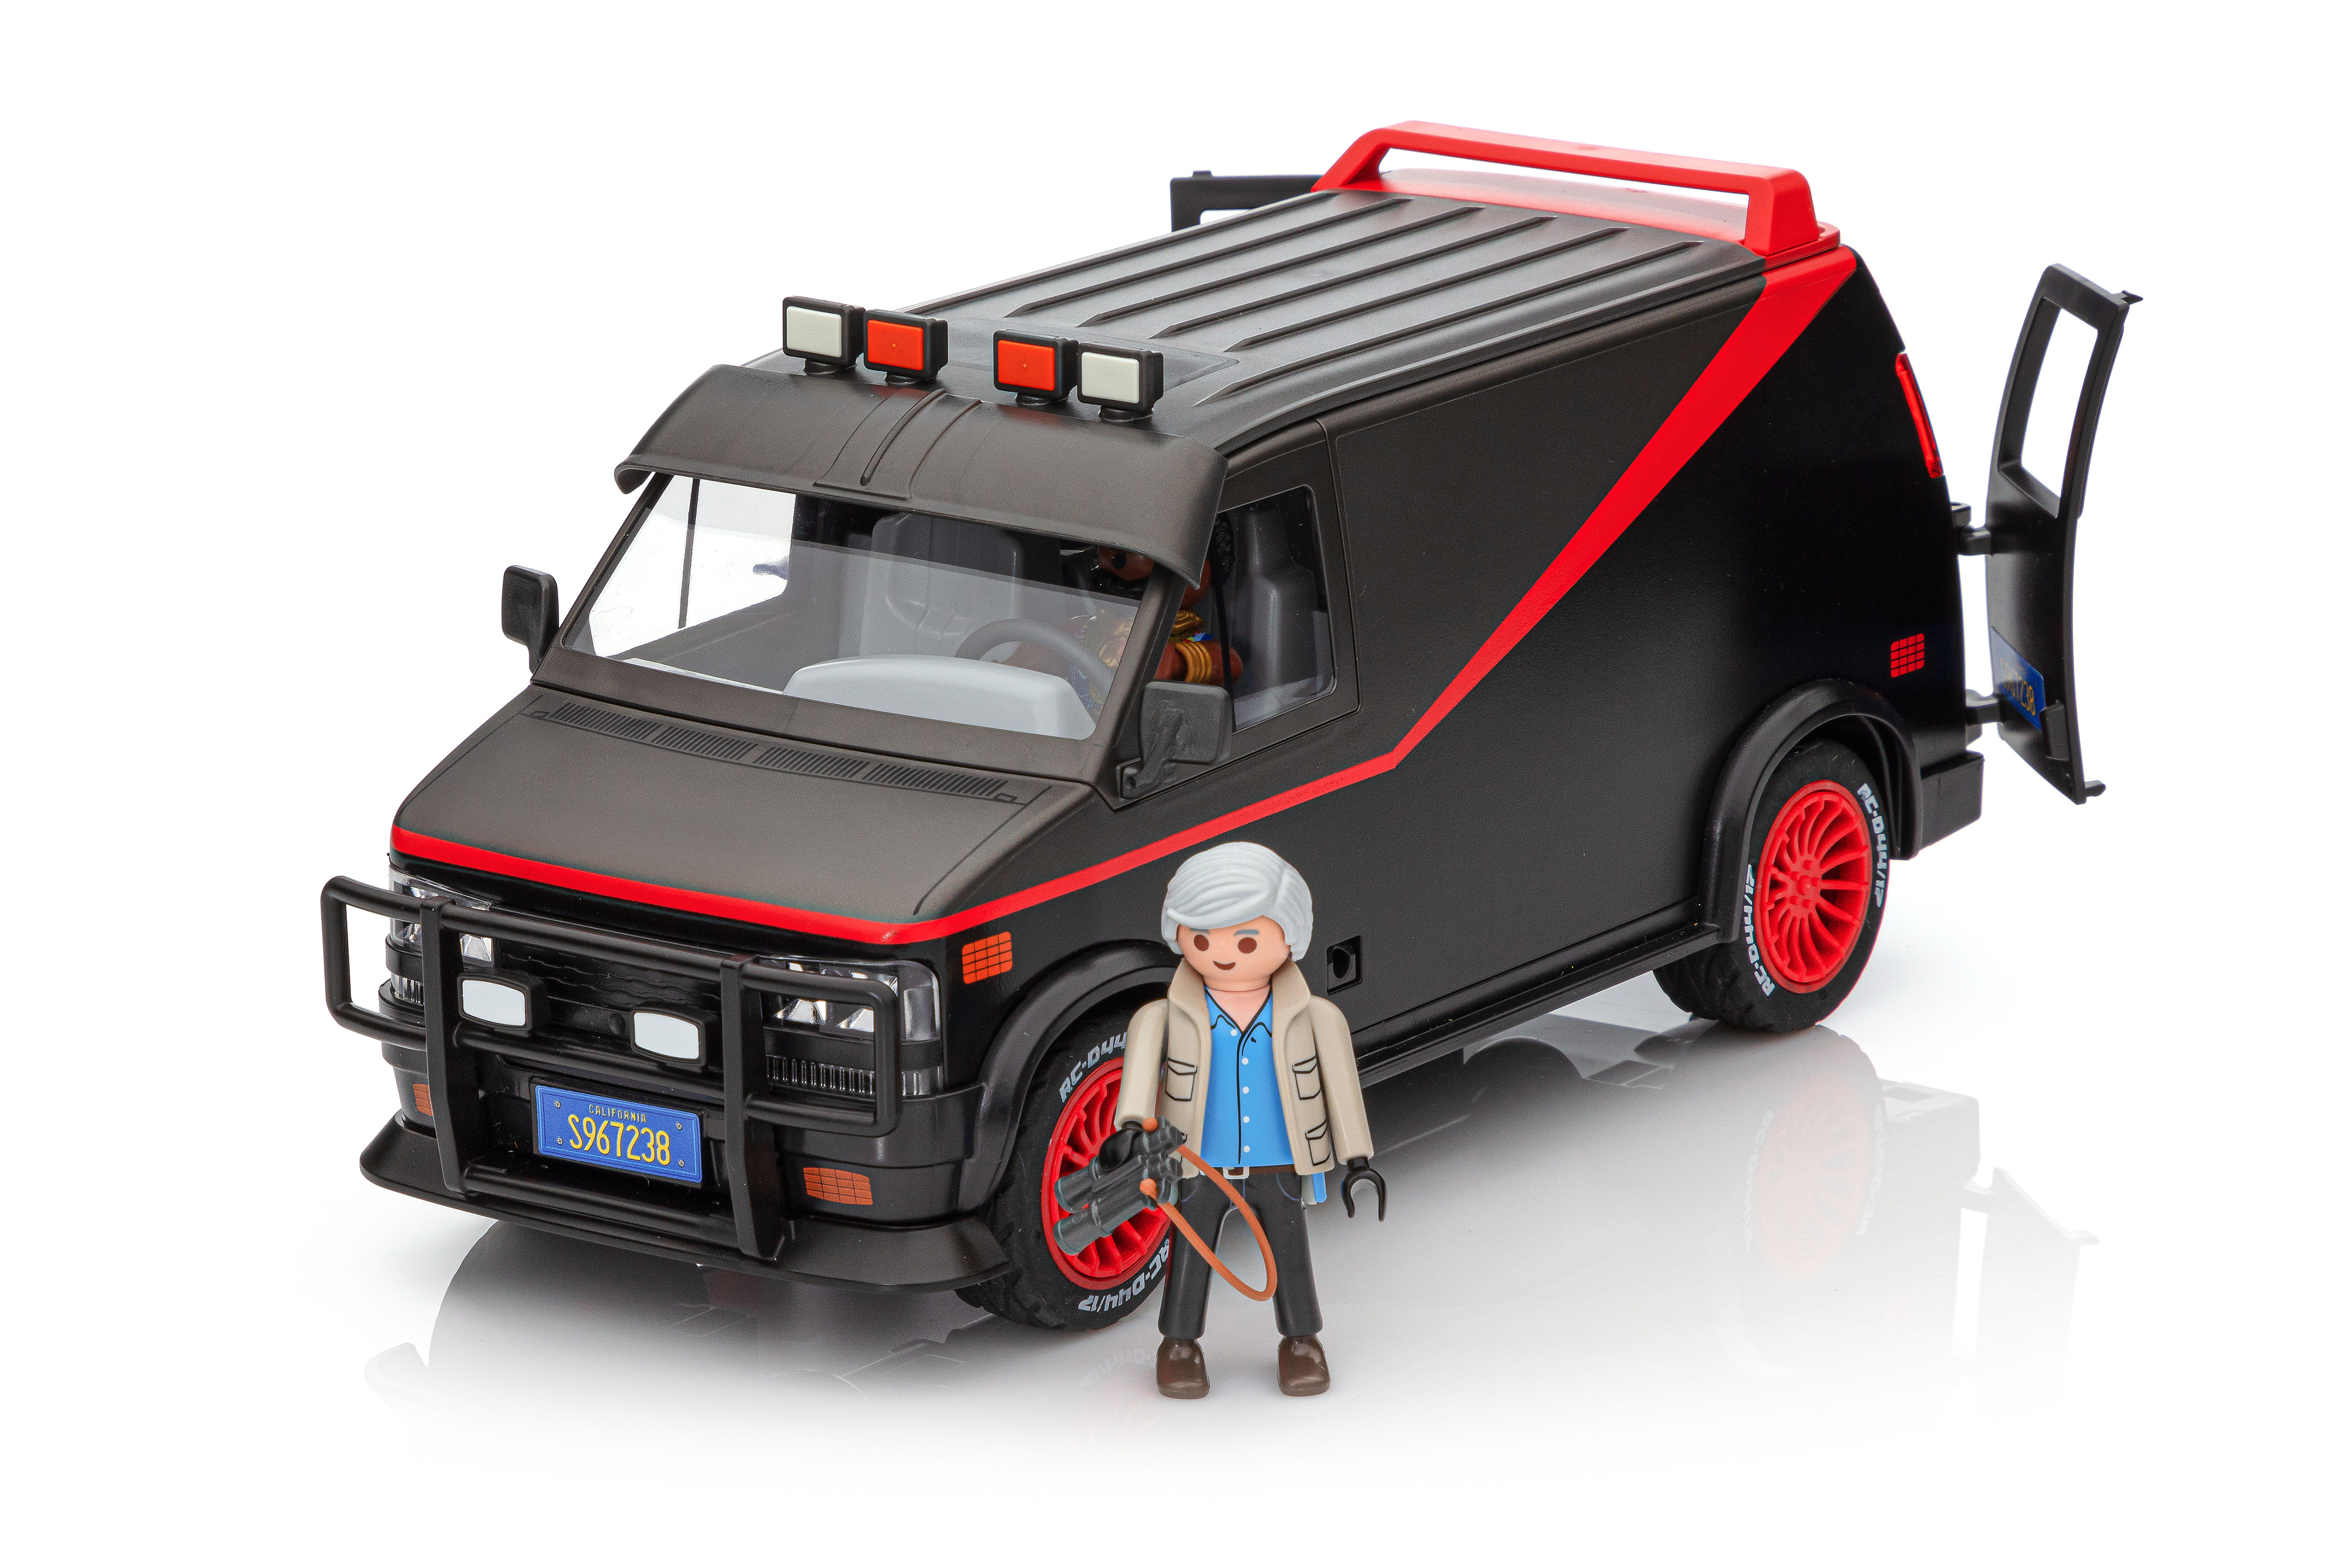 VEHICULE PLAYMOBIL A Team Neuf Agence Tous Risques. EUR 30,00 - PicClick FR